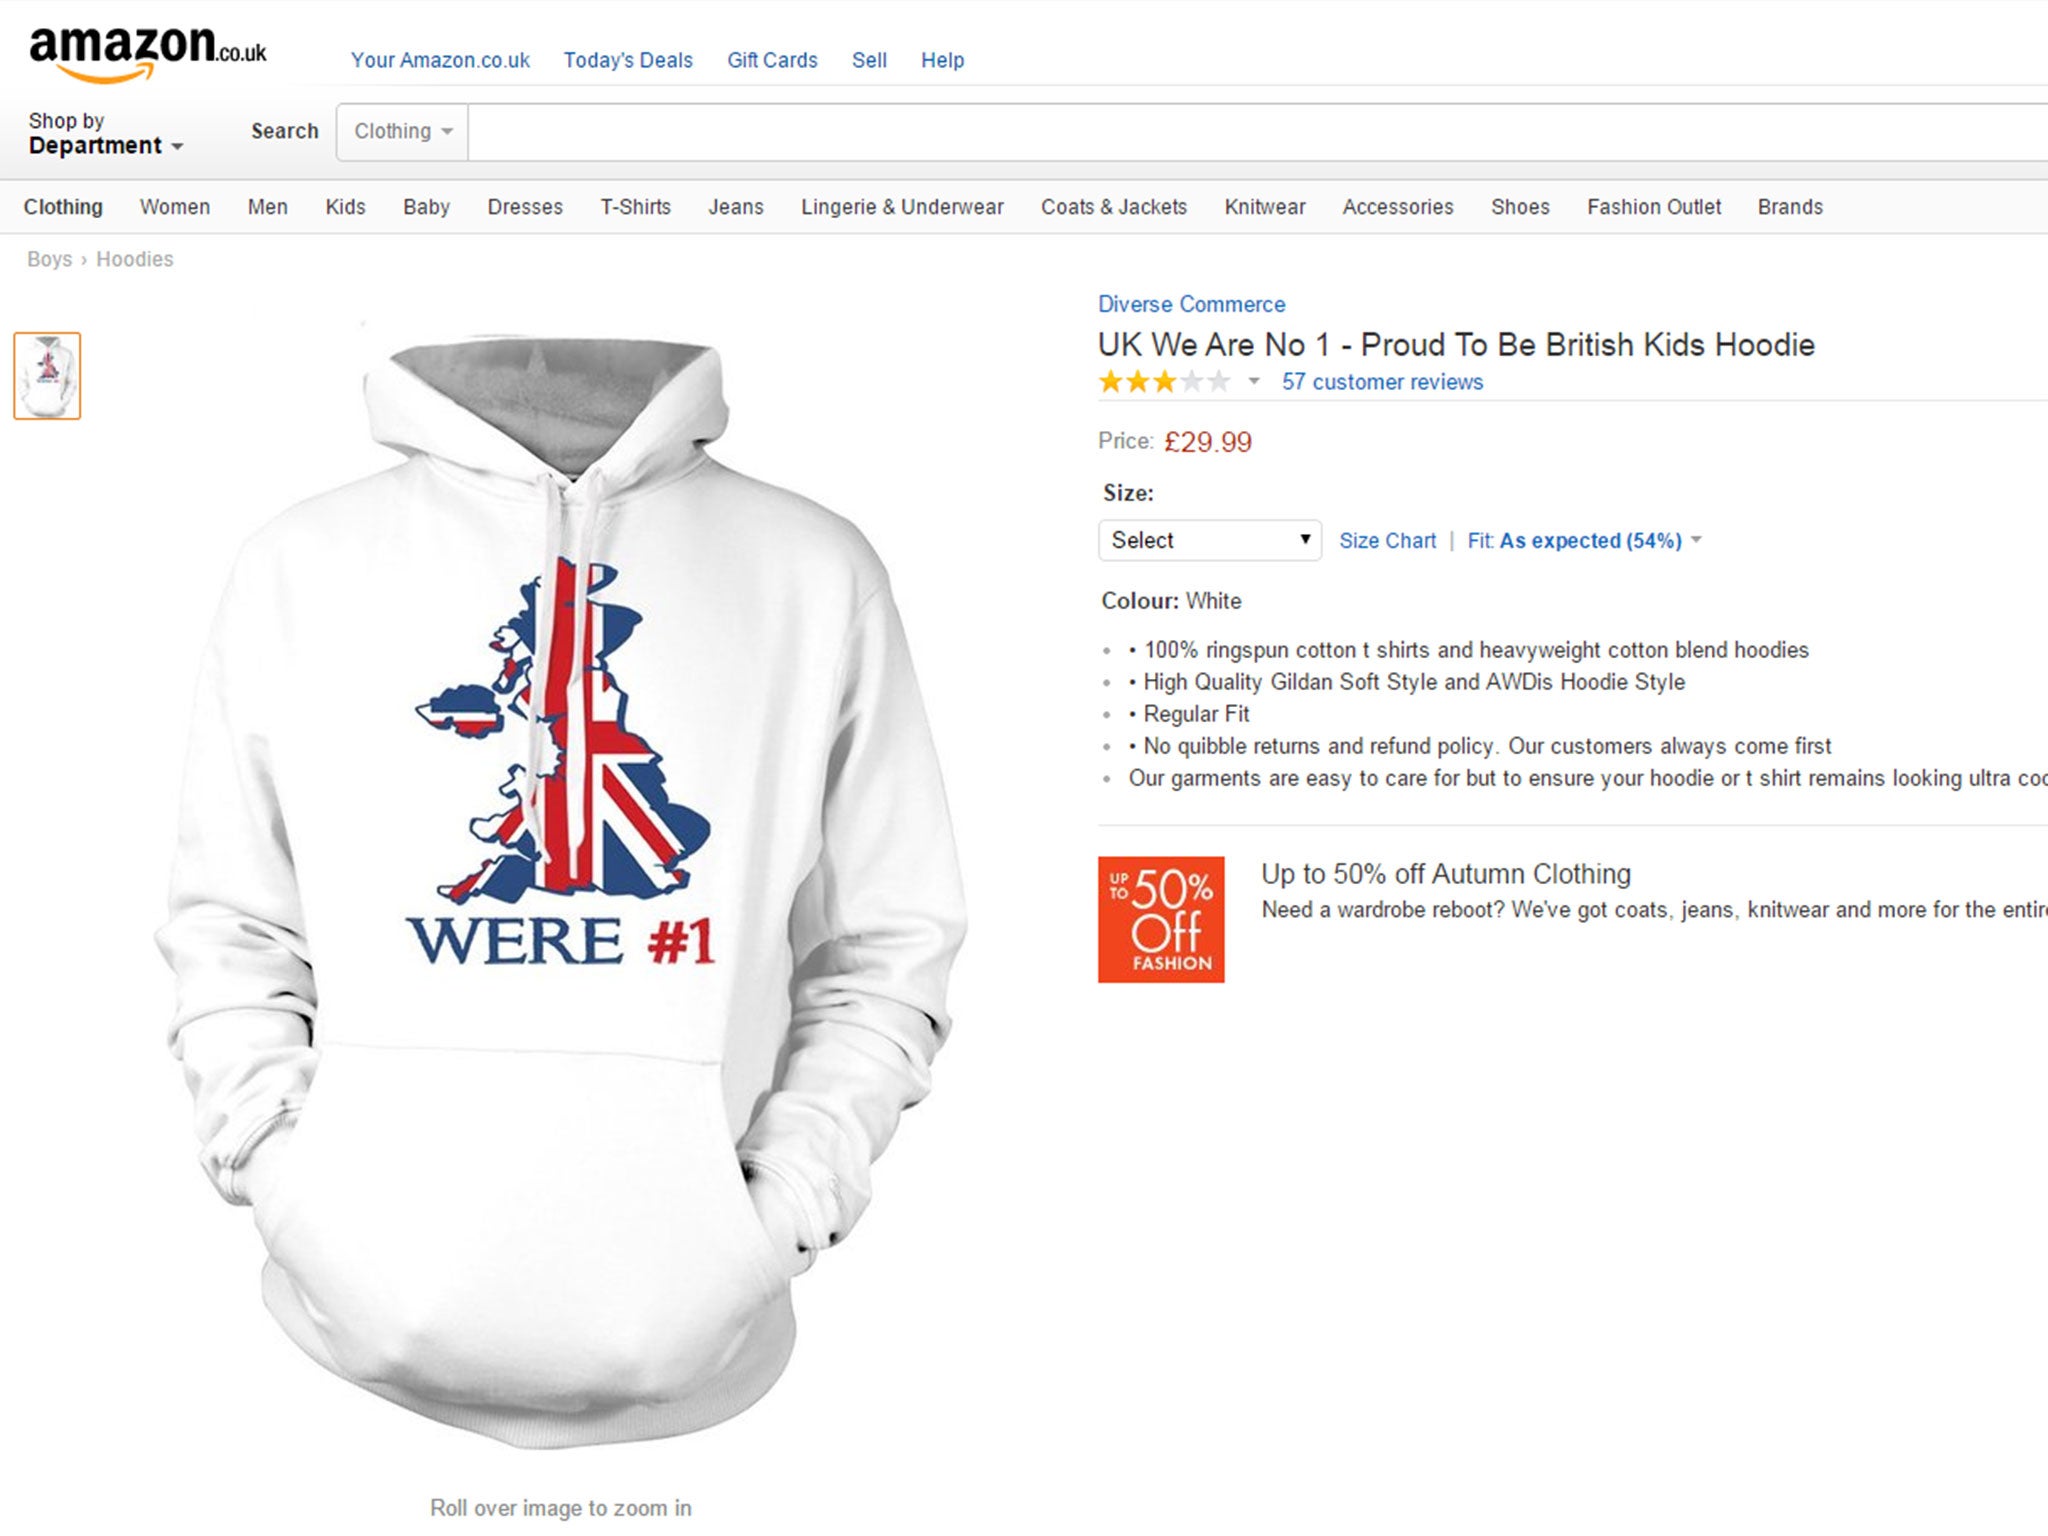 The hoodie is on sale at Amazon UK